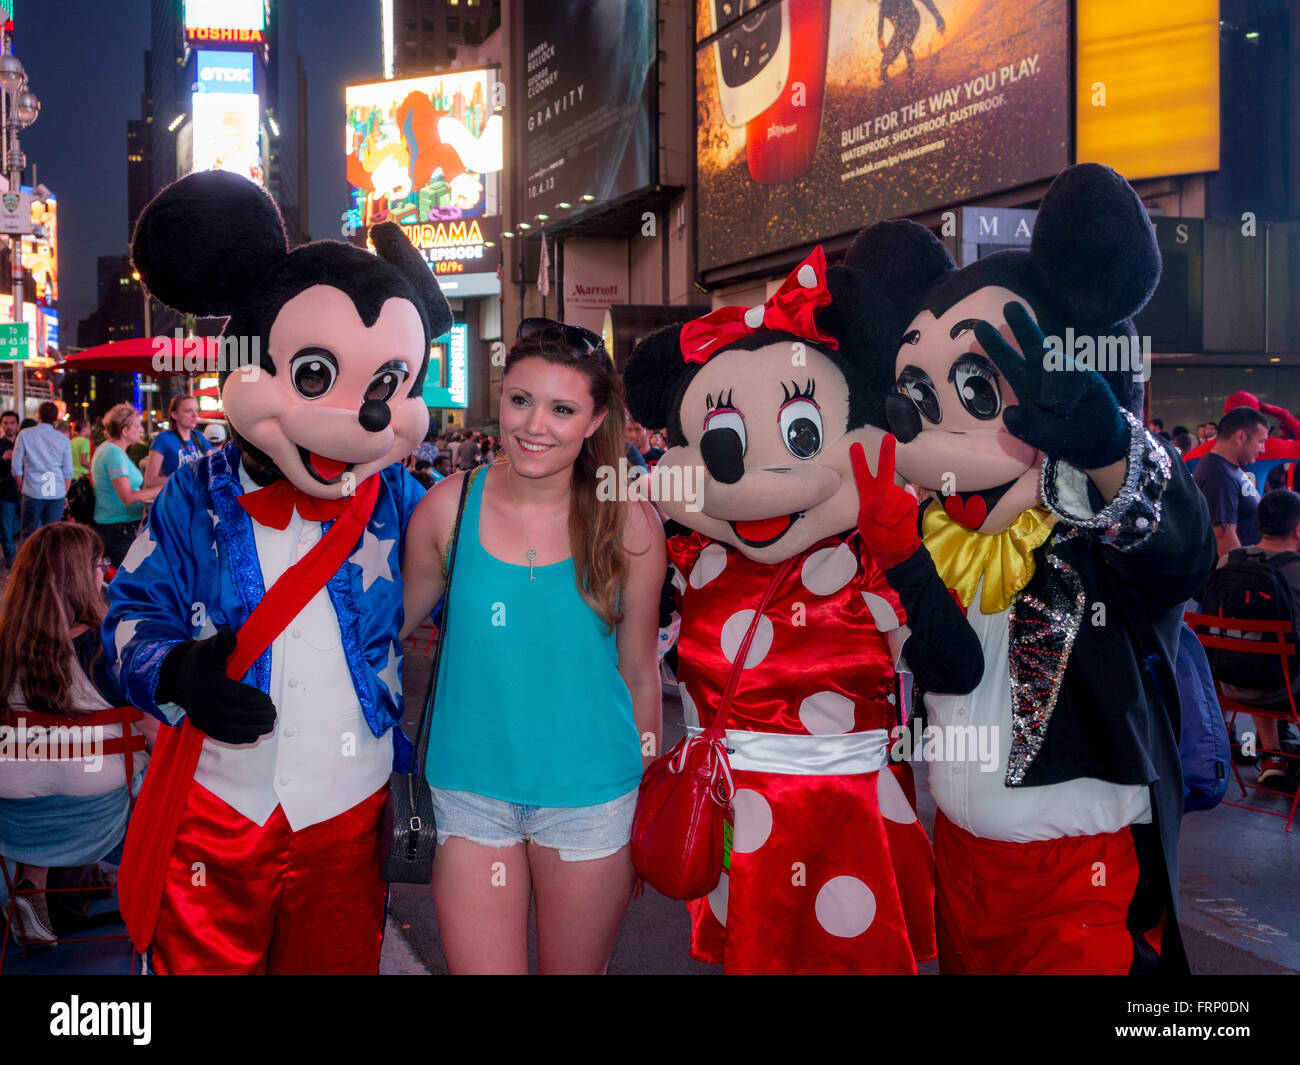 Female tourist with Mickey and Minnie Mouse characters, Times Square at night, New York City, USA. Stock Photo